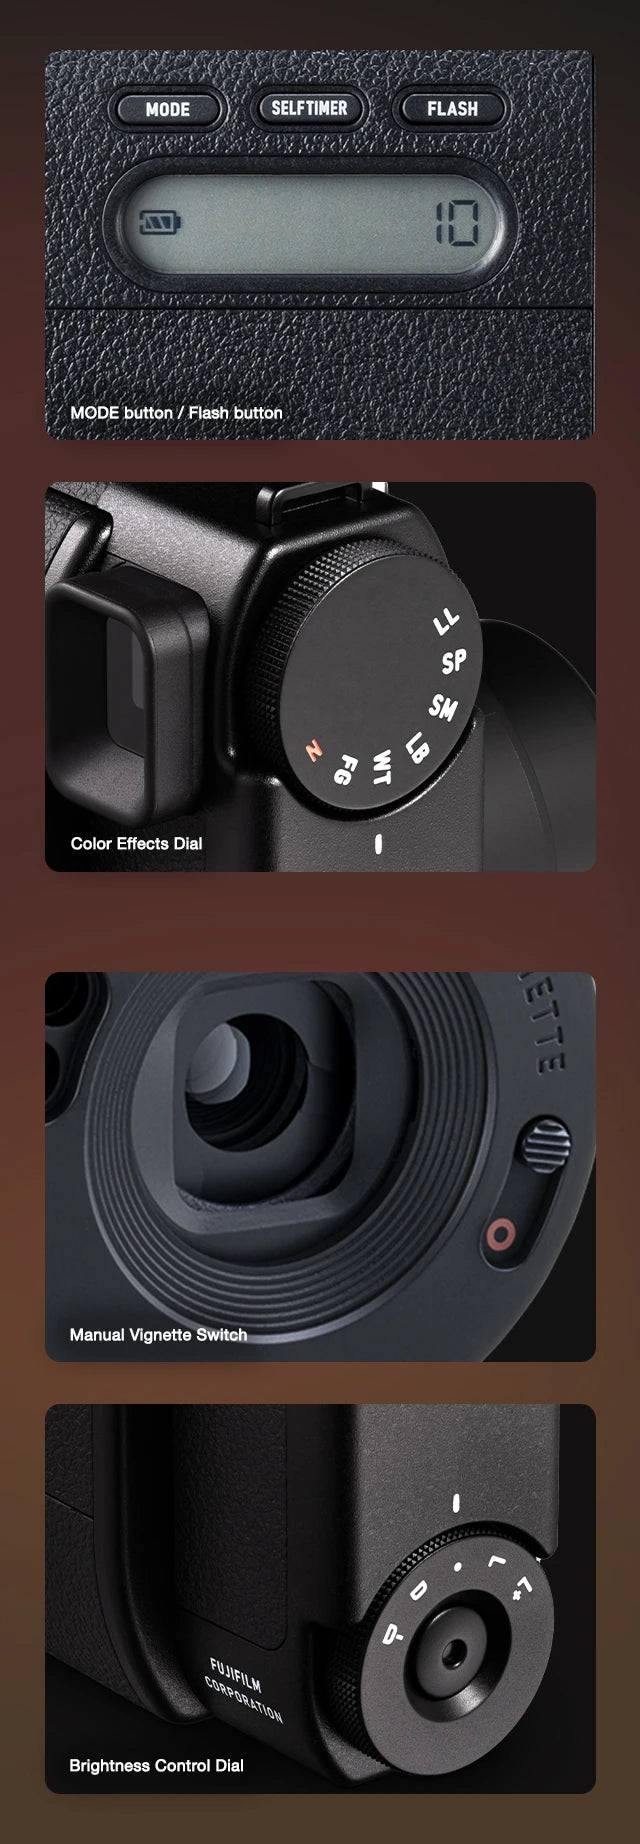 Features of Instax Mini 99 Camera